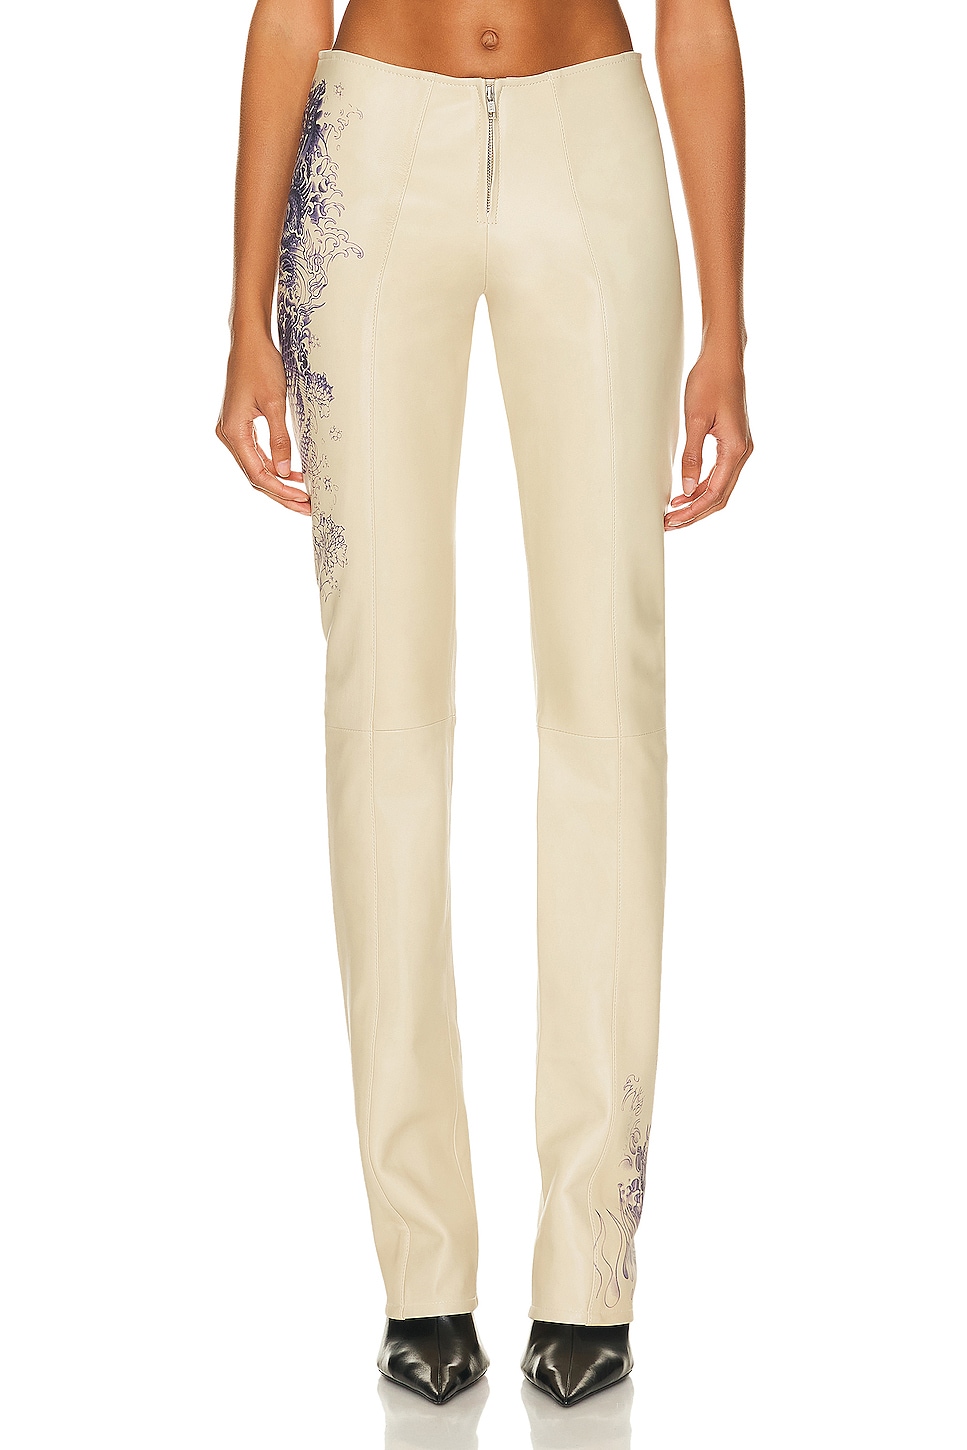 Image 1 of Jean Paul Gaultier Tattoo Detail Flare Trouser in Nude & Navy